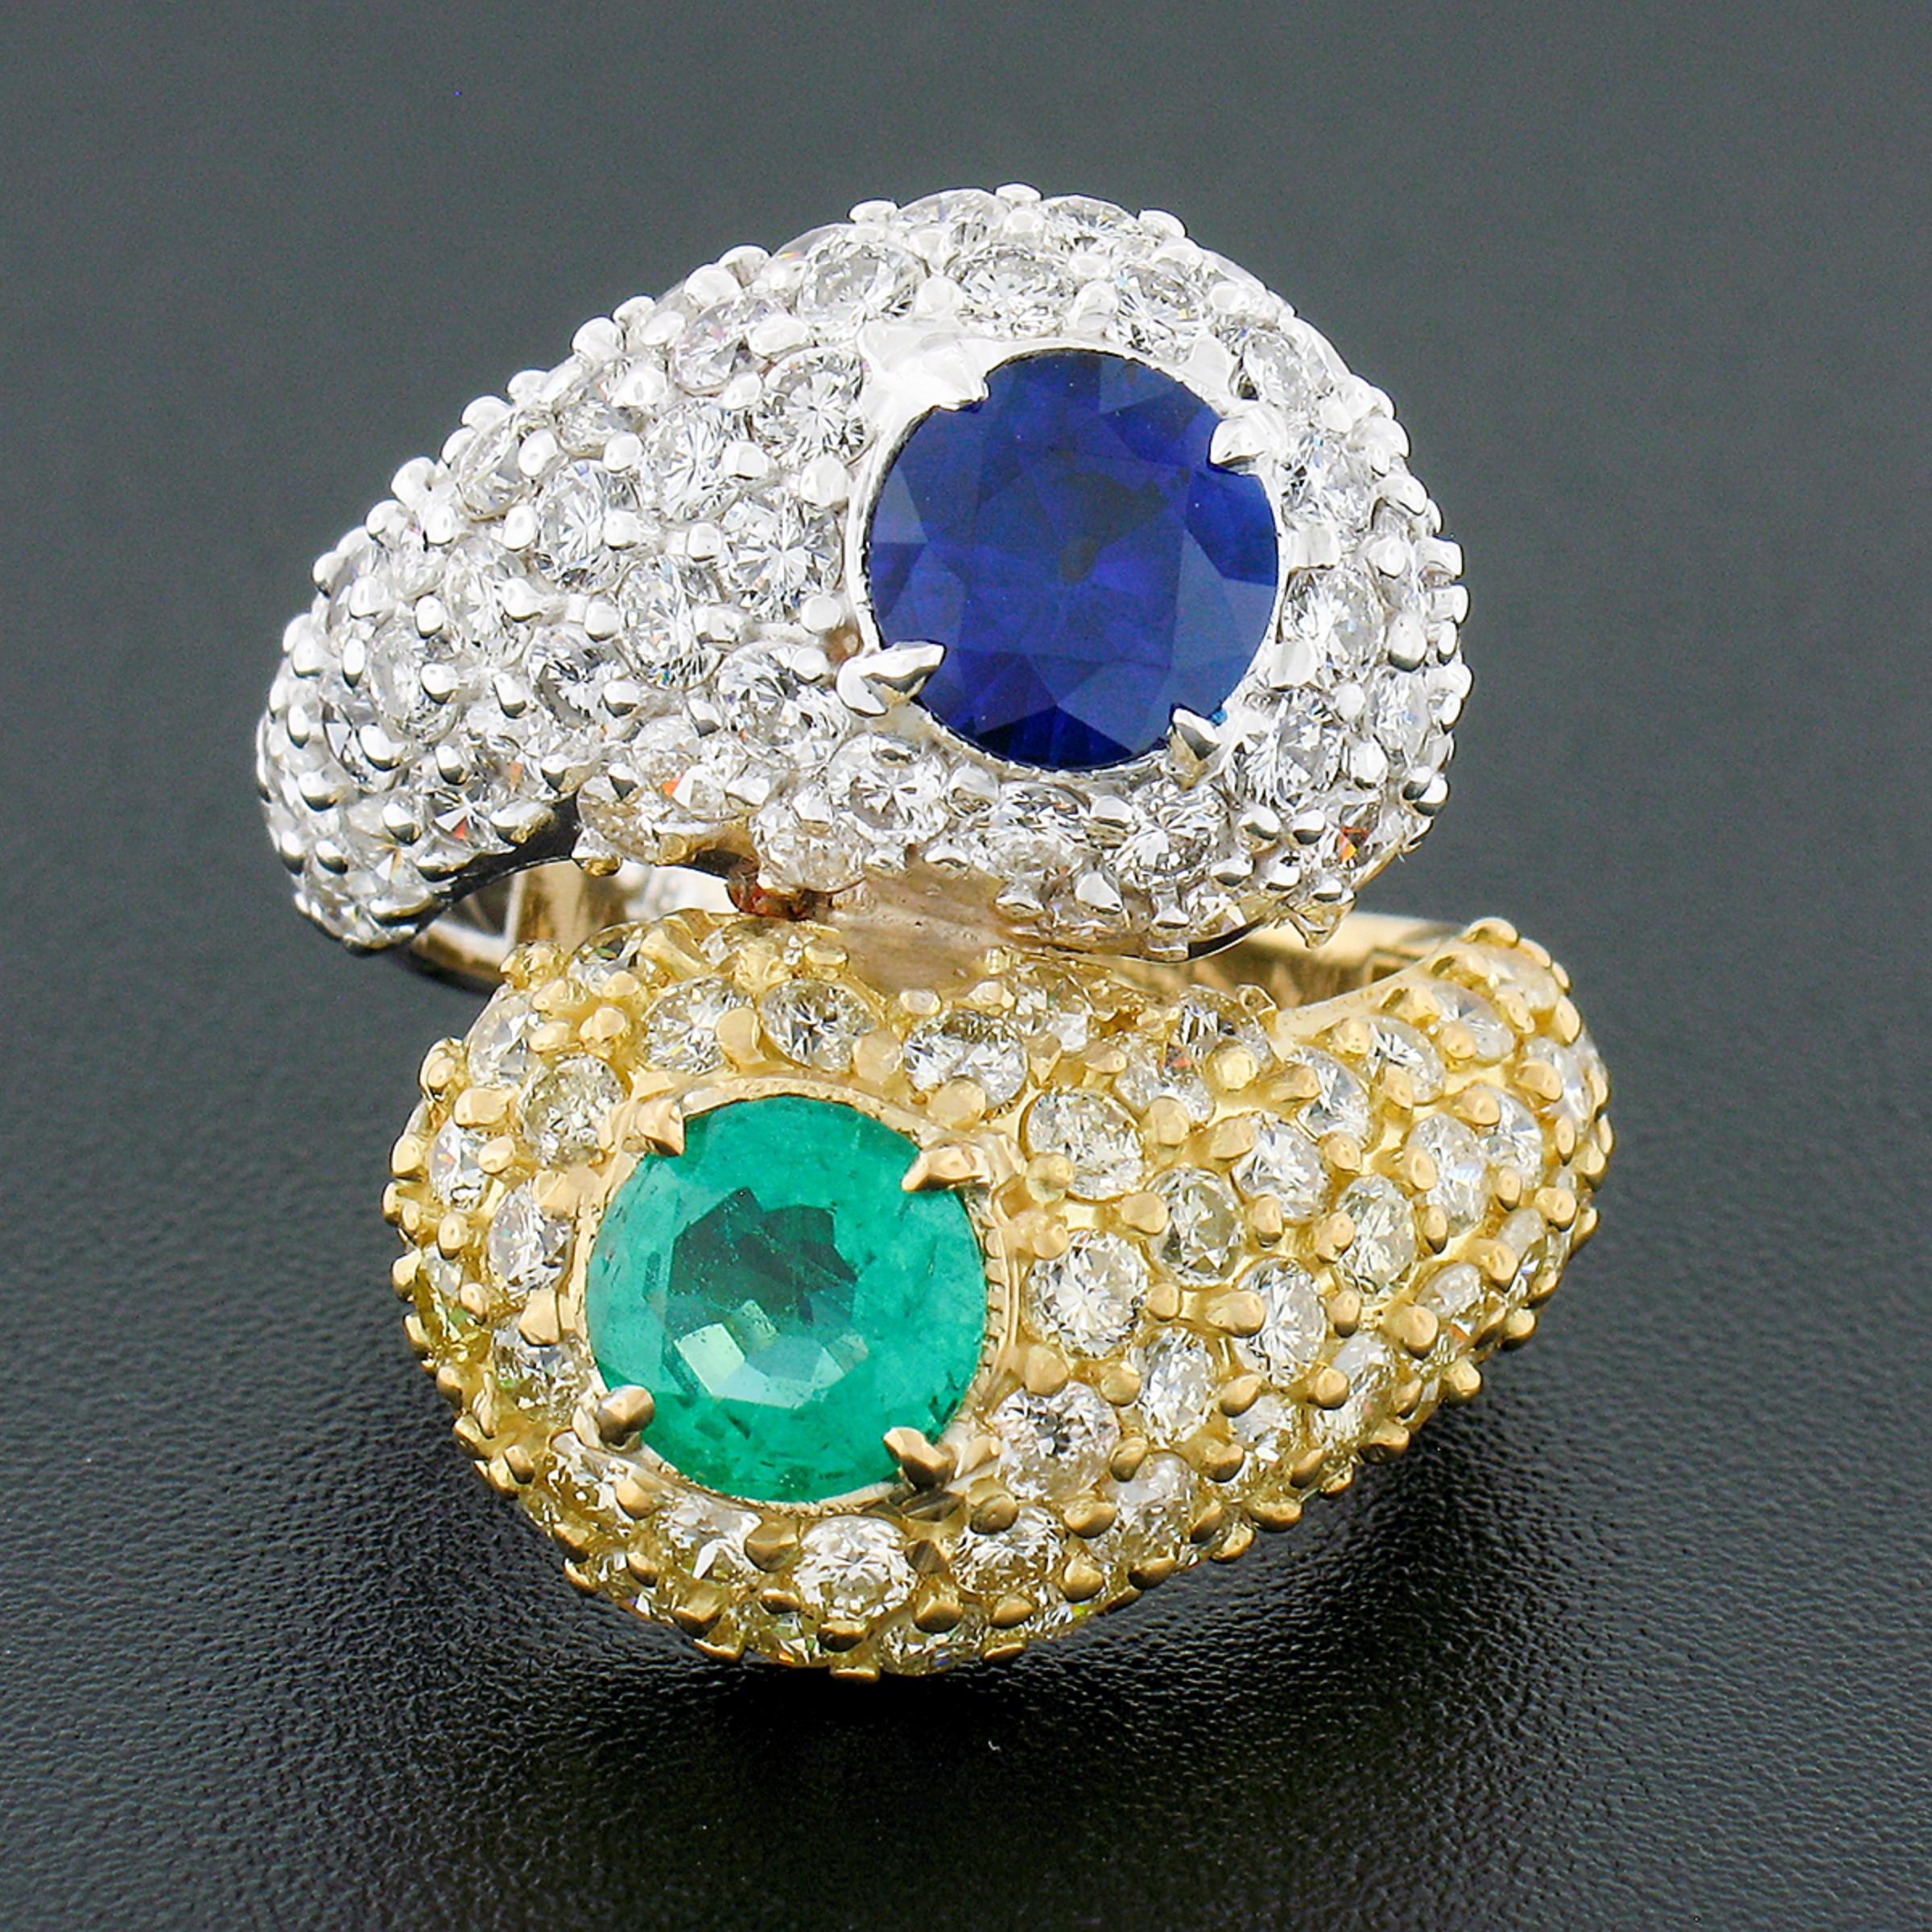 Here we have a truly stunning ring which is crafted in solid 18k yellow and white gold featuring an elegant bypass style that is neatly set with a round brilliant cut sapphire and emerald and drenched with diamonds throughout its top. The white gold